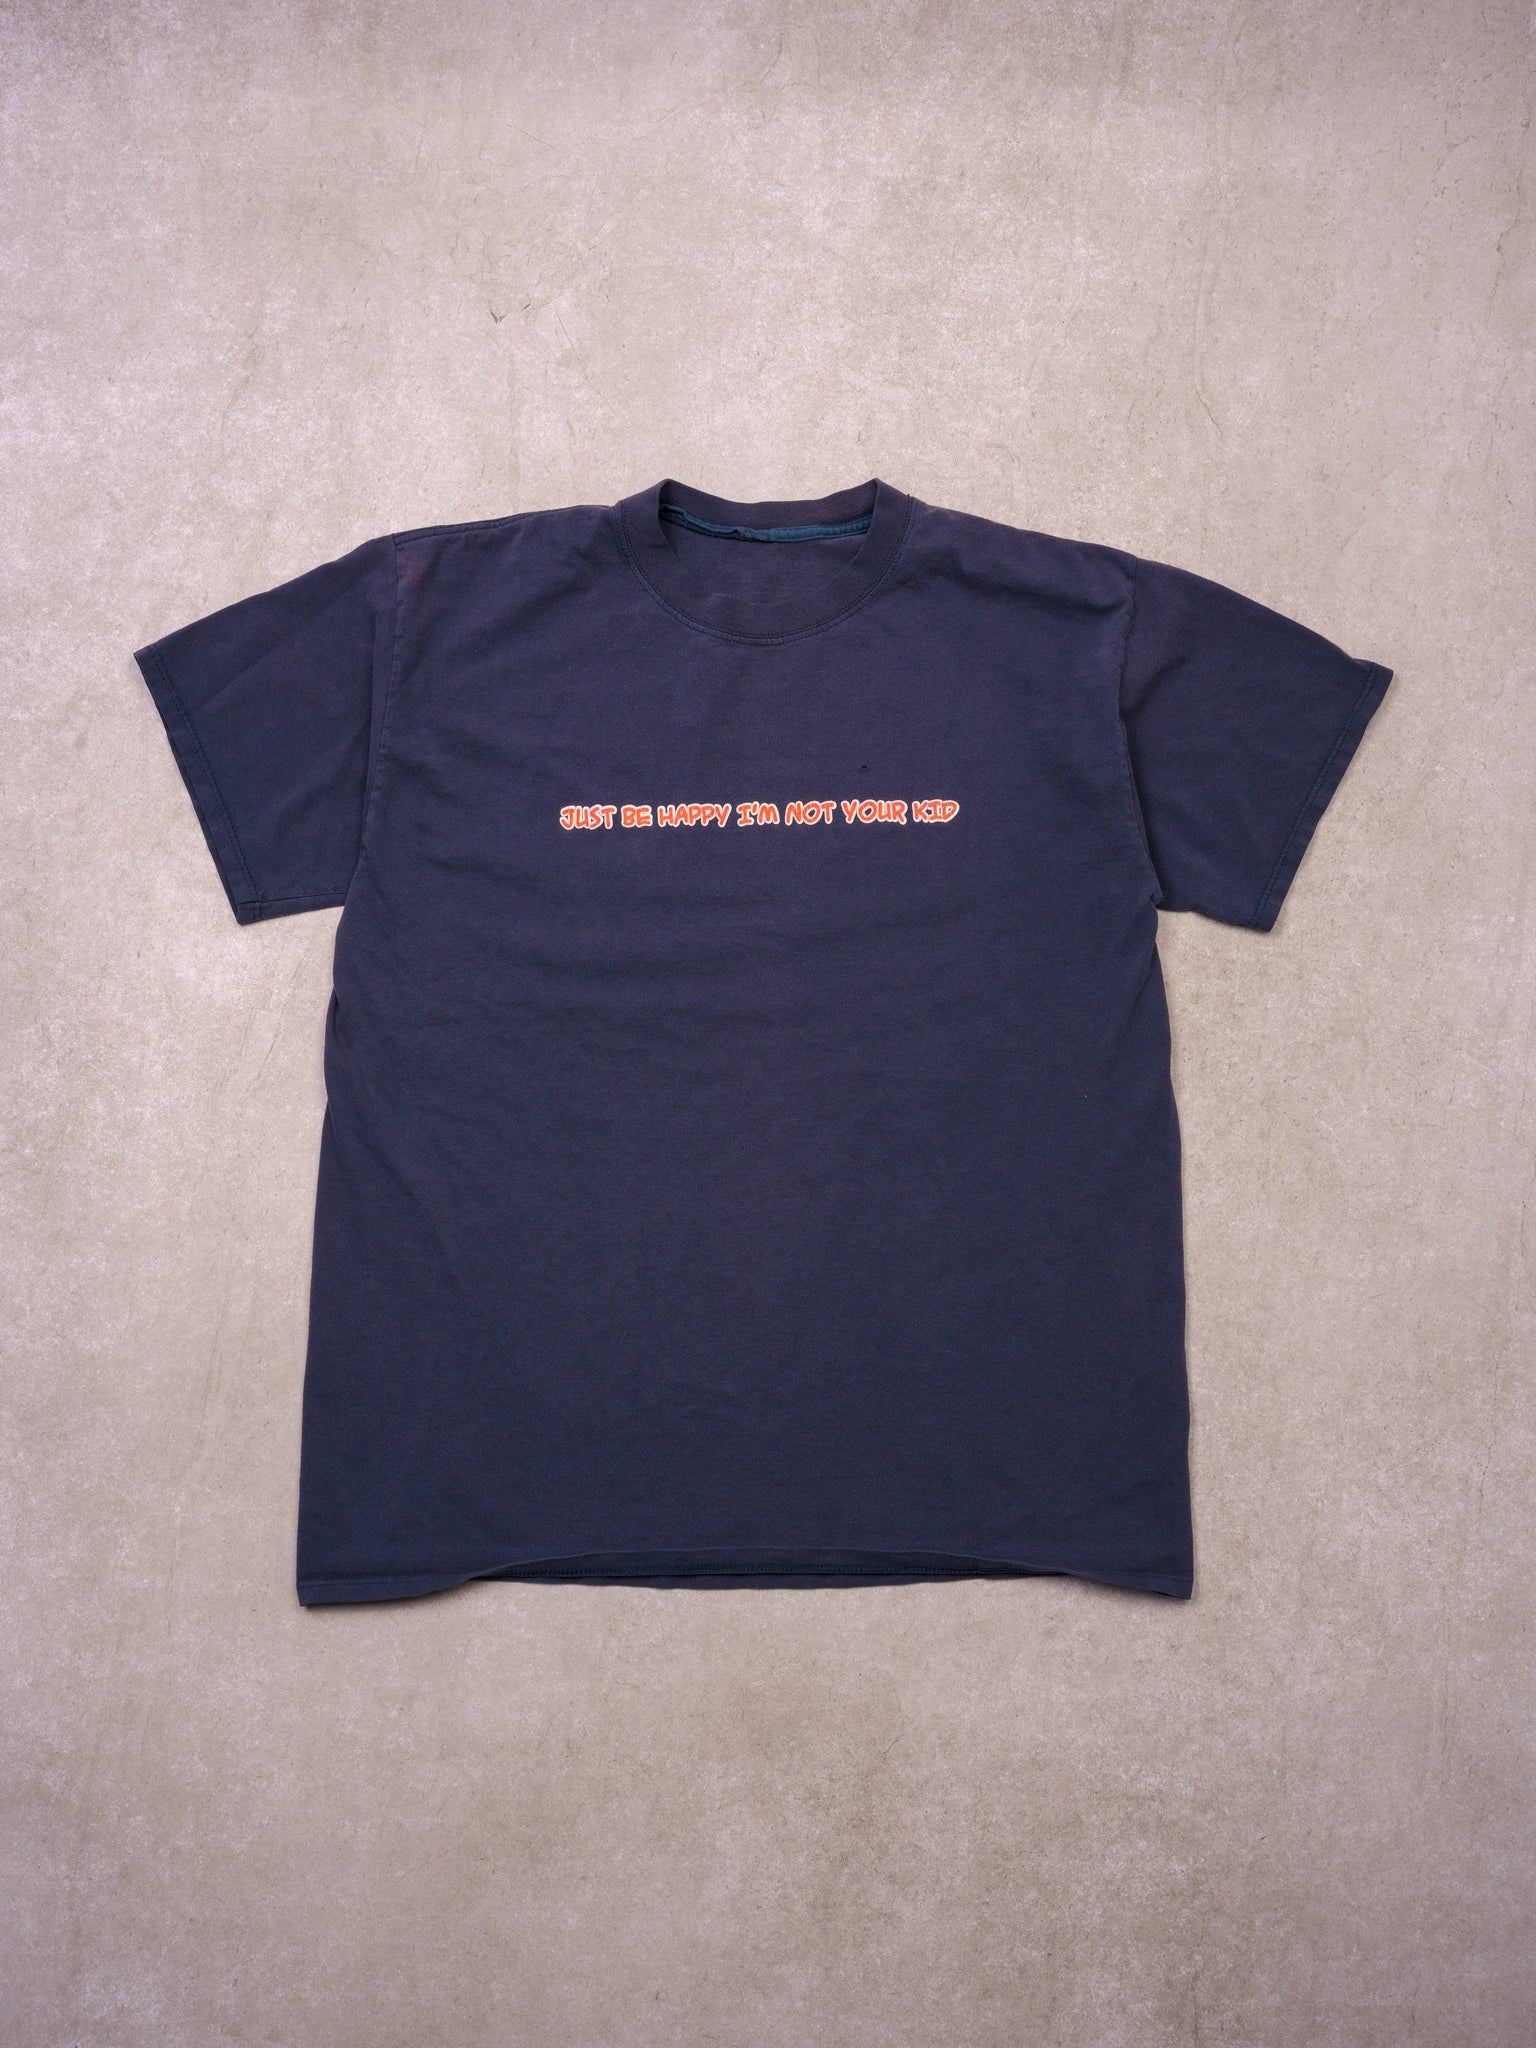 Vintage 90s Washed Navy Blue "Just Be Happy I'm Not Your Kid" Tee (M)